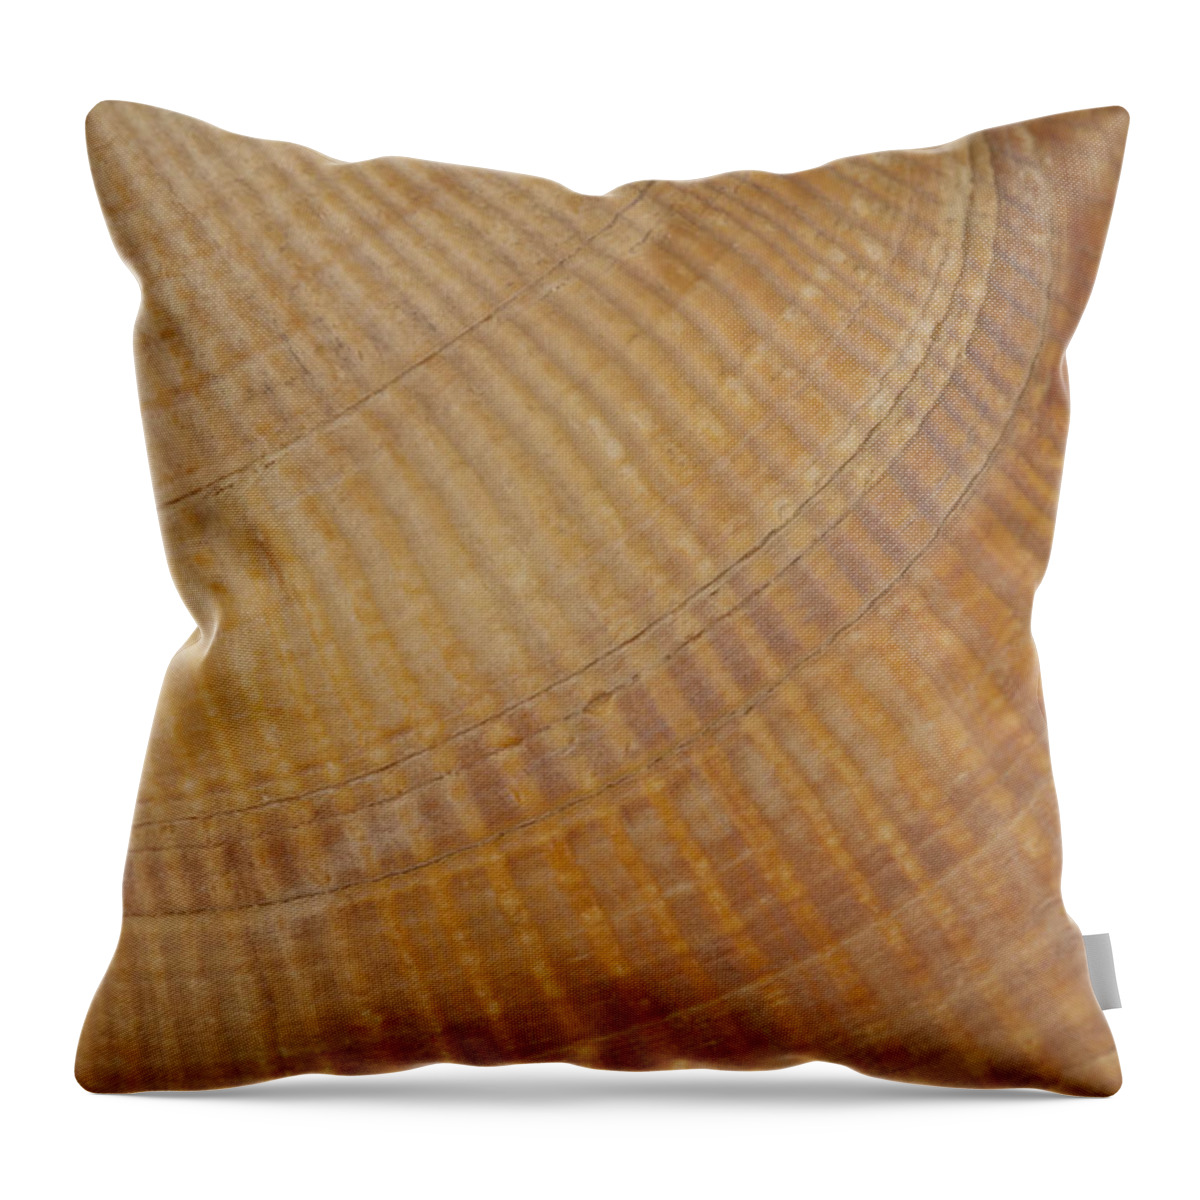 Scallop Sea Shell Throw Pillow featuring the photograph Sea Shell Macro by Sandra Foster